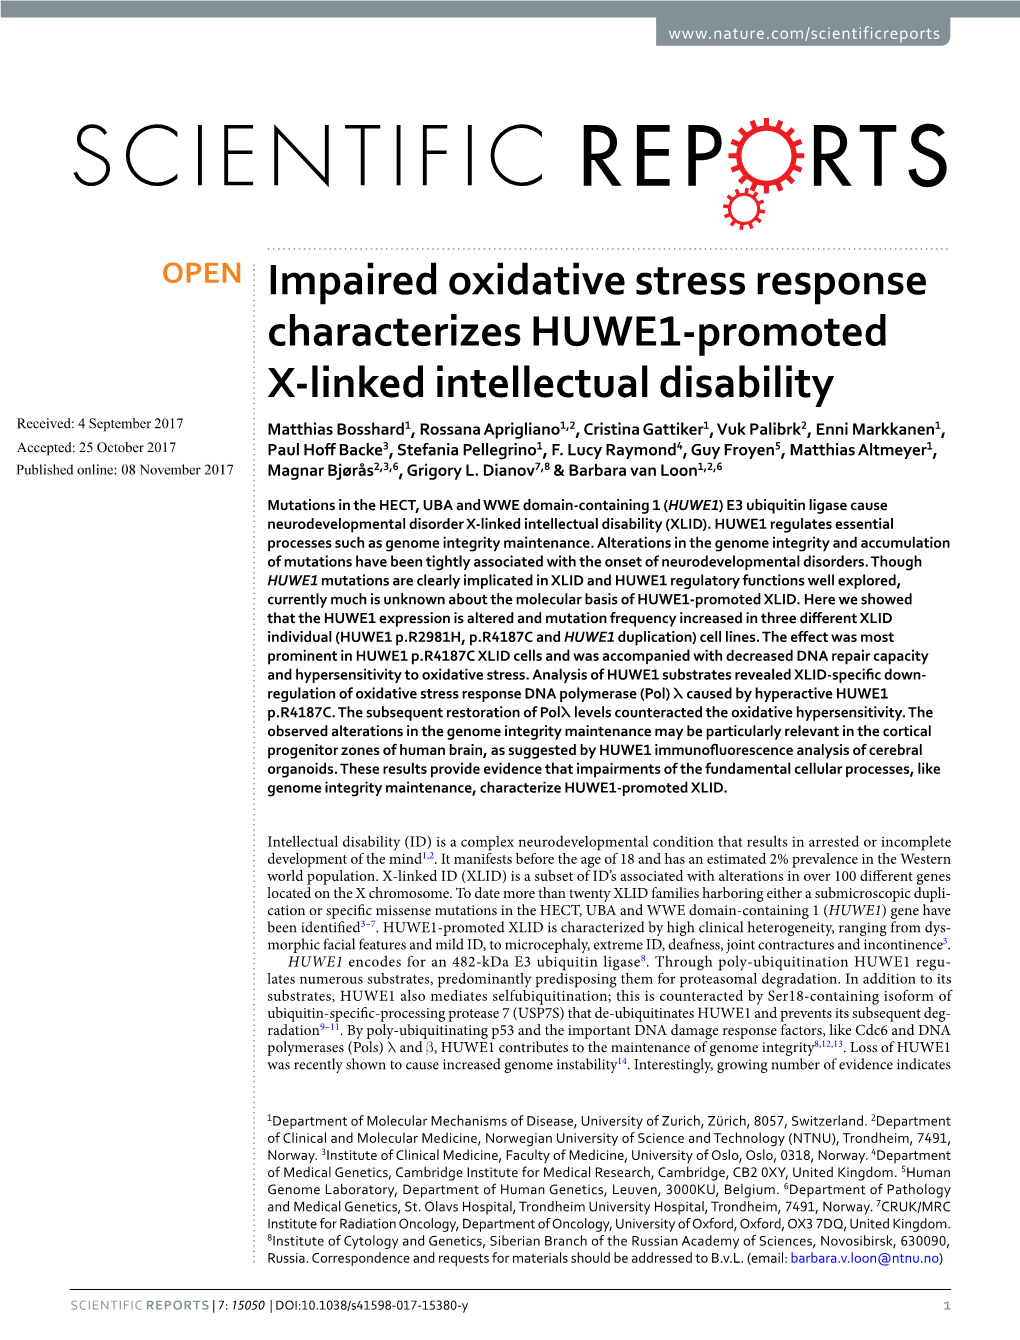 Impaired Oxidative Stress Response Characterizes HUWE1-Promoted X-Linked Intellectual Disability